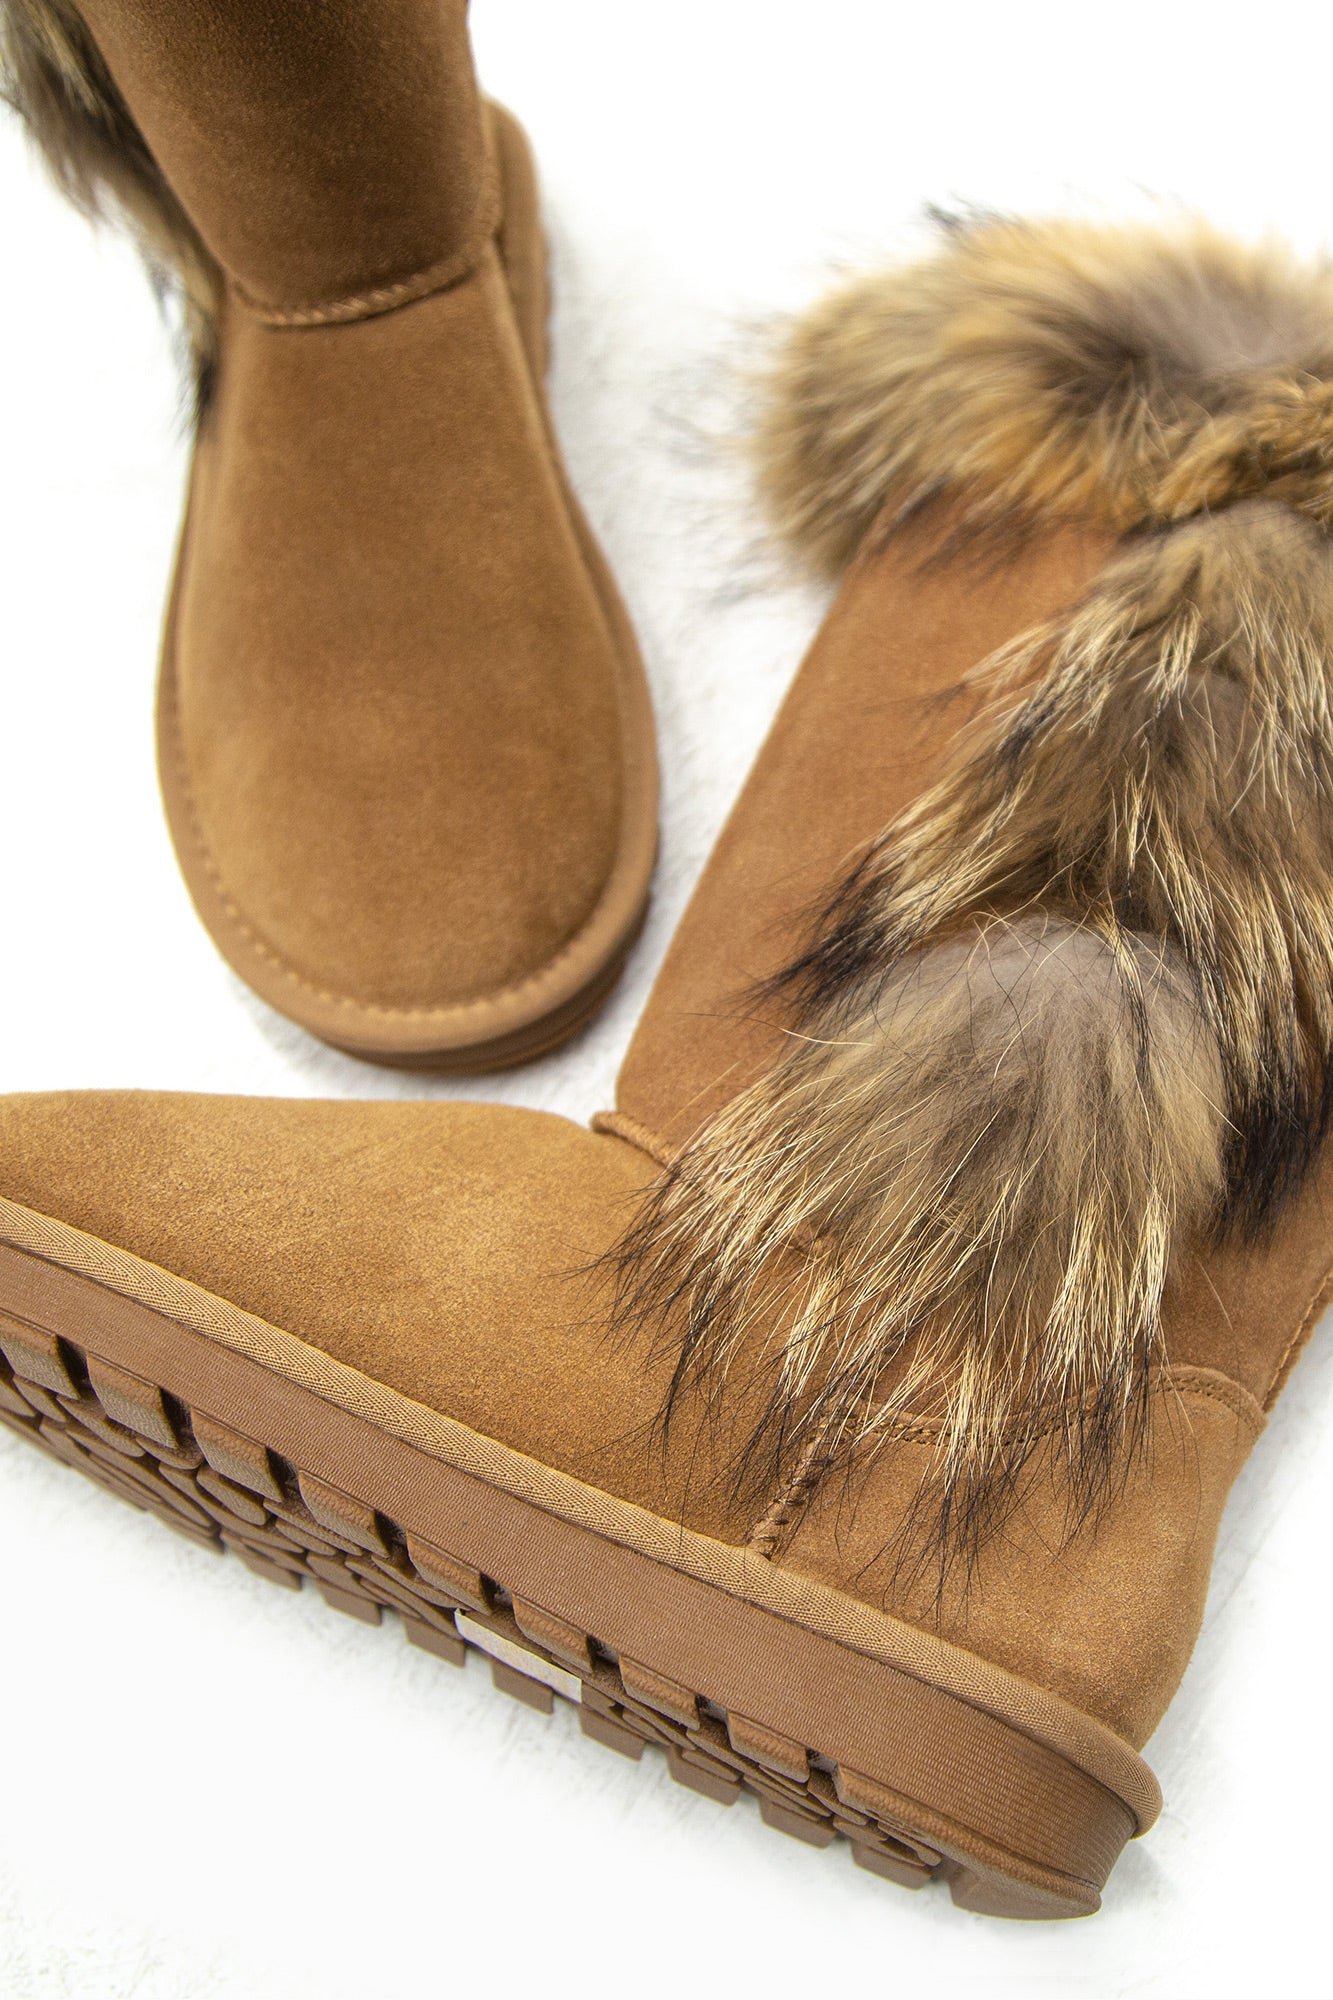 Sheepskin Boots Natural Leather with Fur